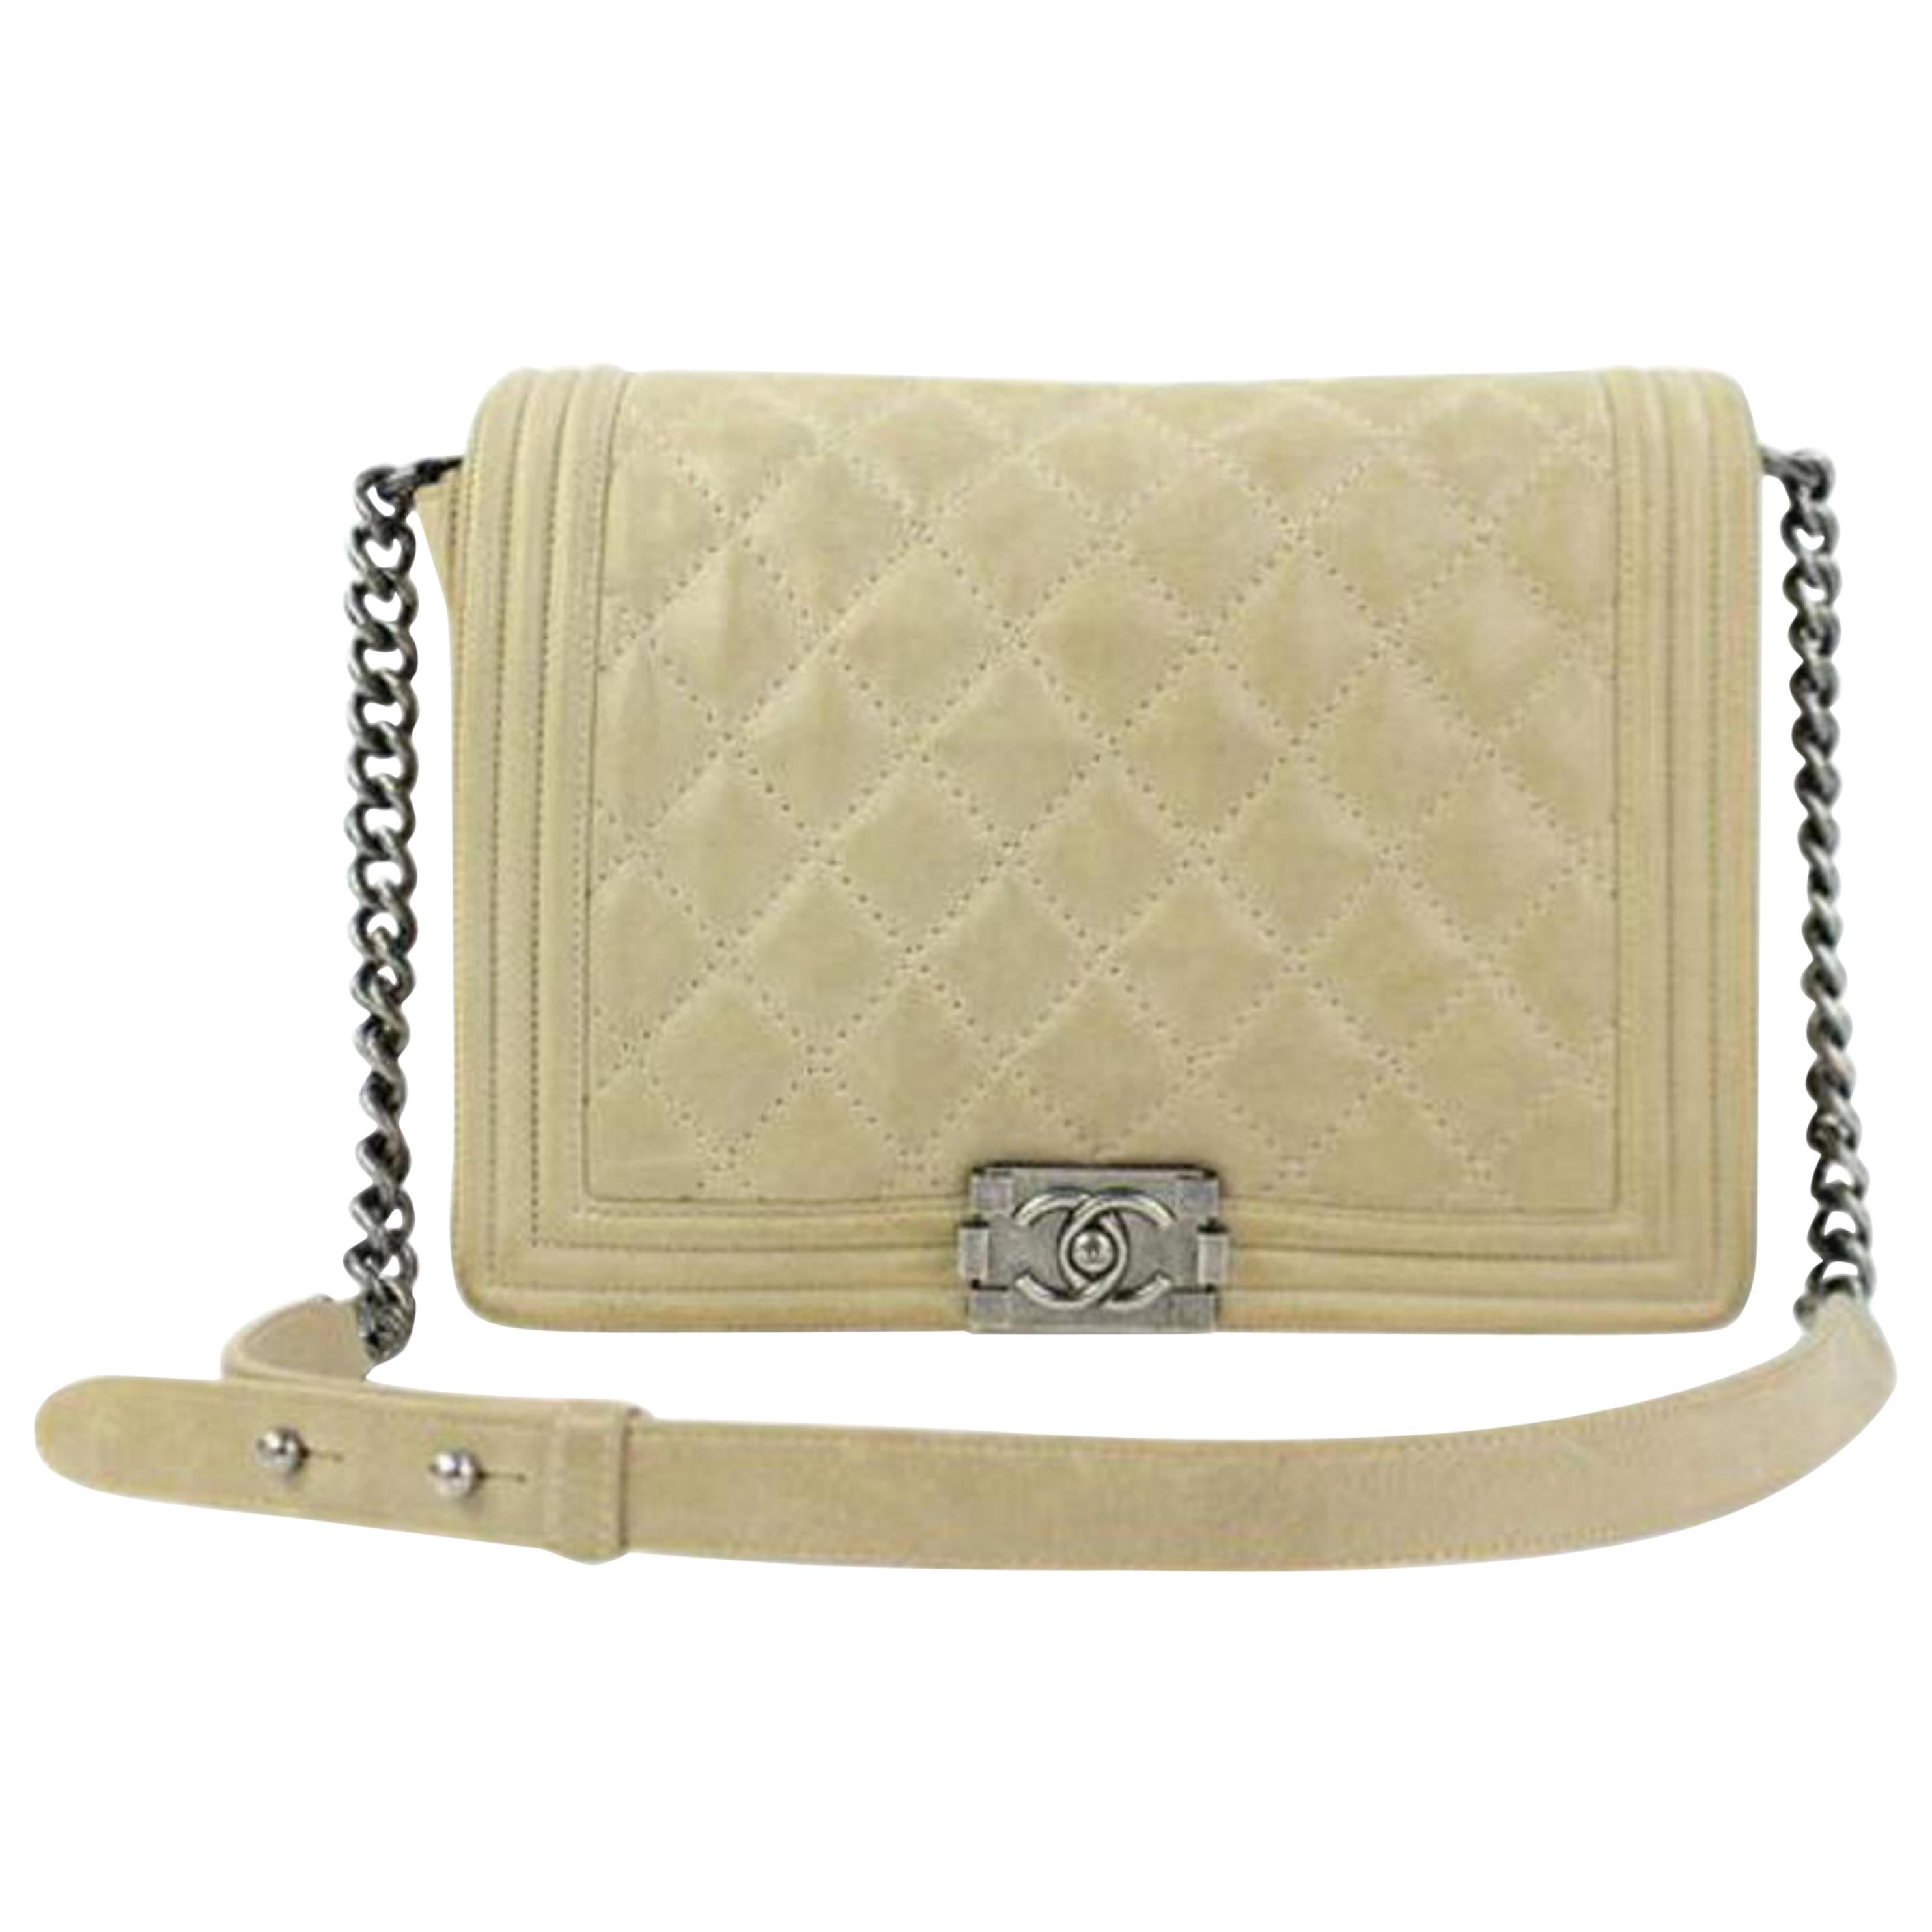 Chanel Boy Quilted Iridescent Le 26ccty51717 Beige Suede Leather Shoulder Bag For Sale